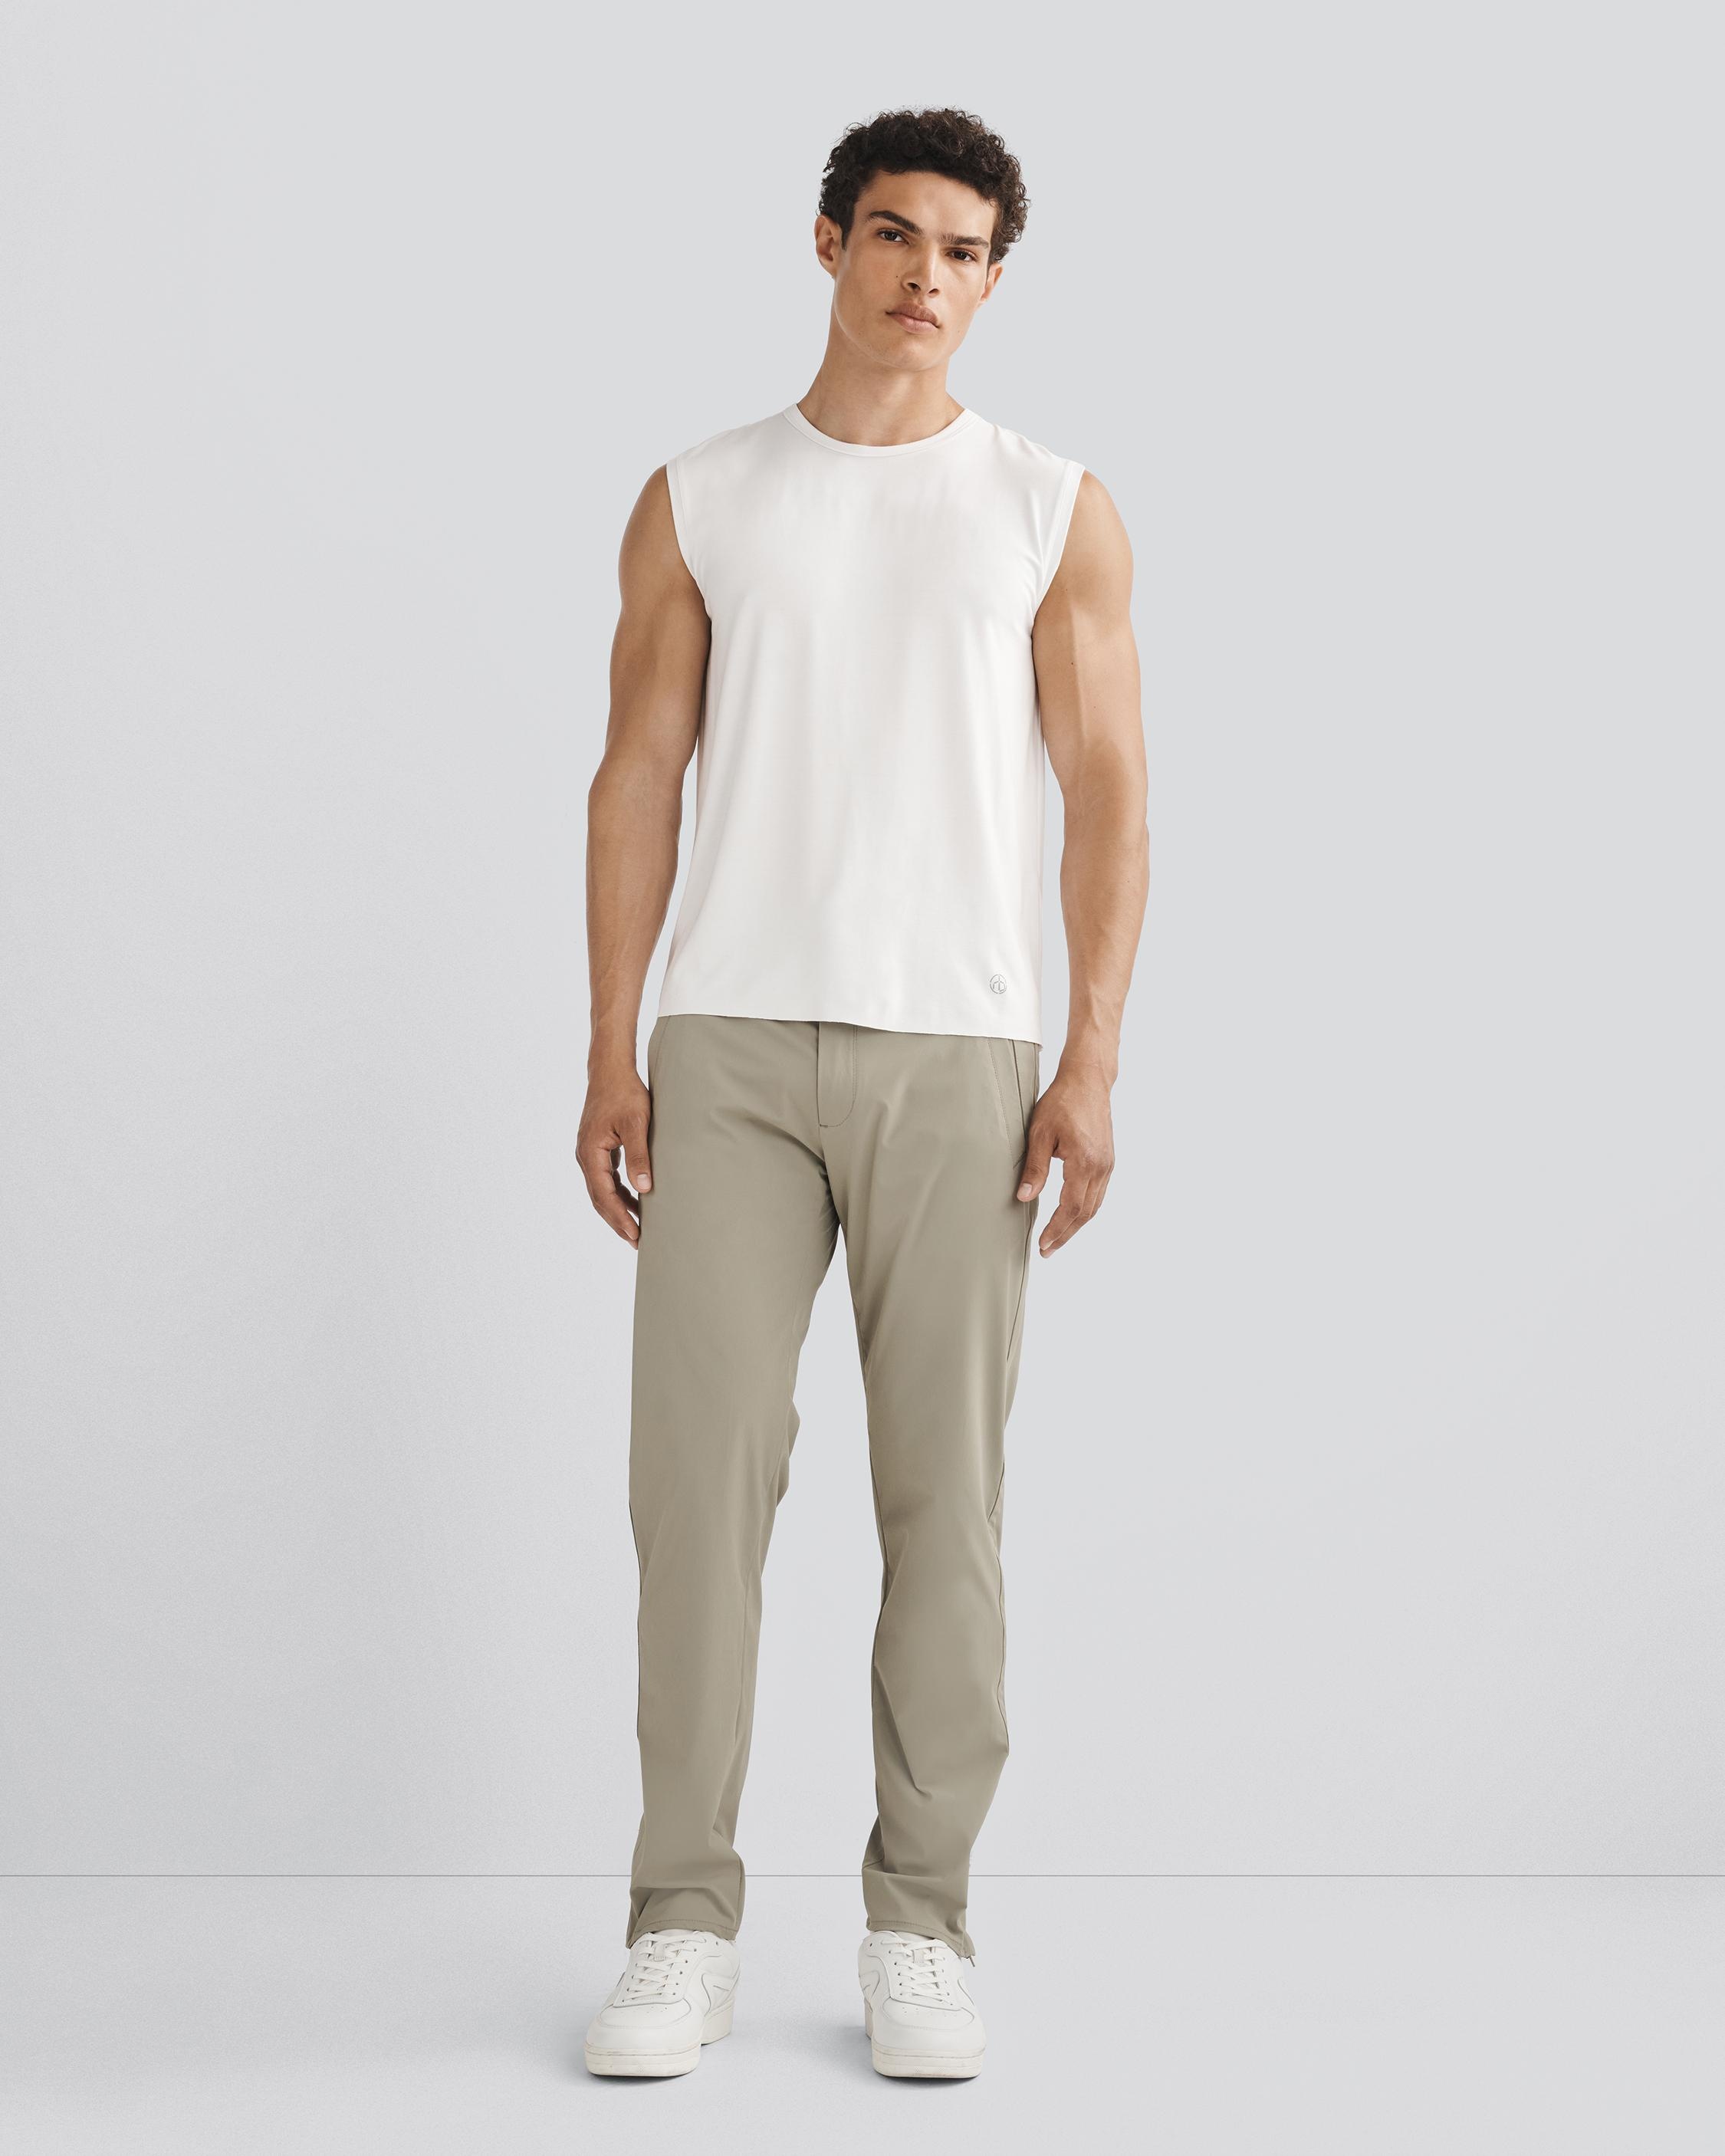 Pursuit Zander Technical Track Pant
Relaxed Fit - 3